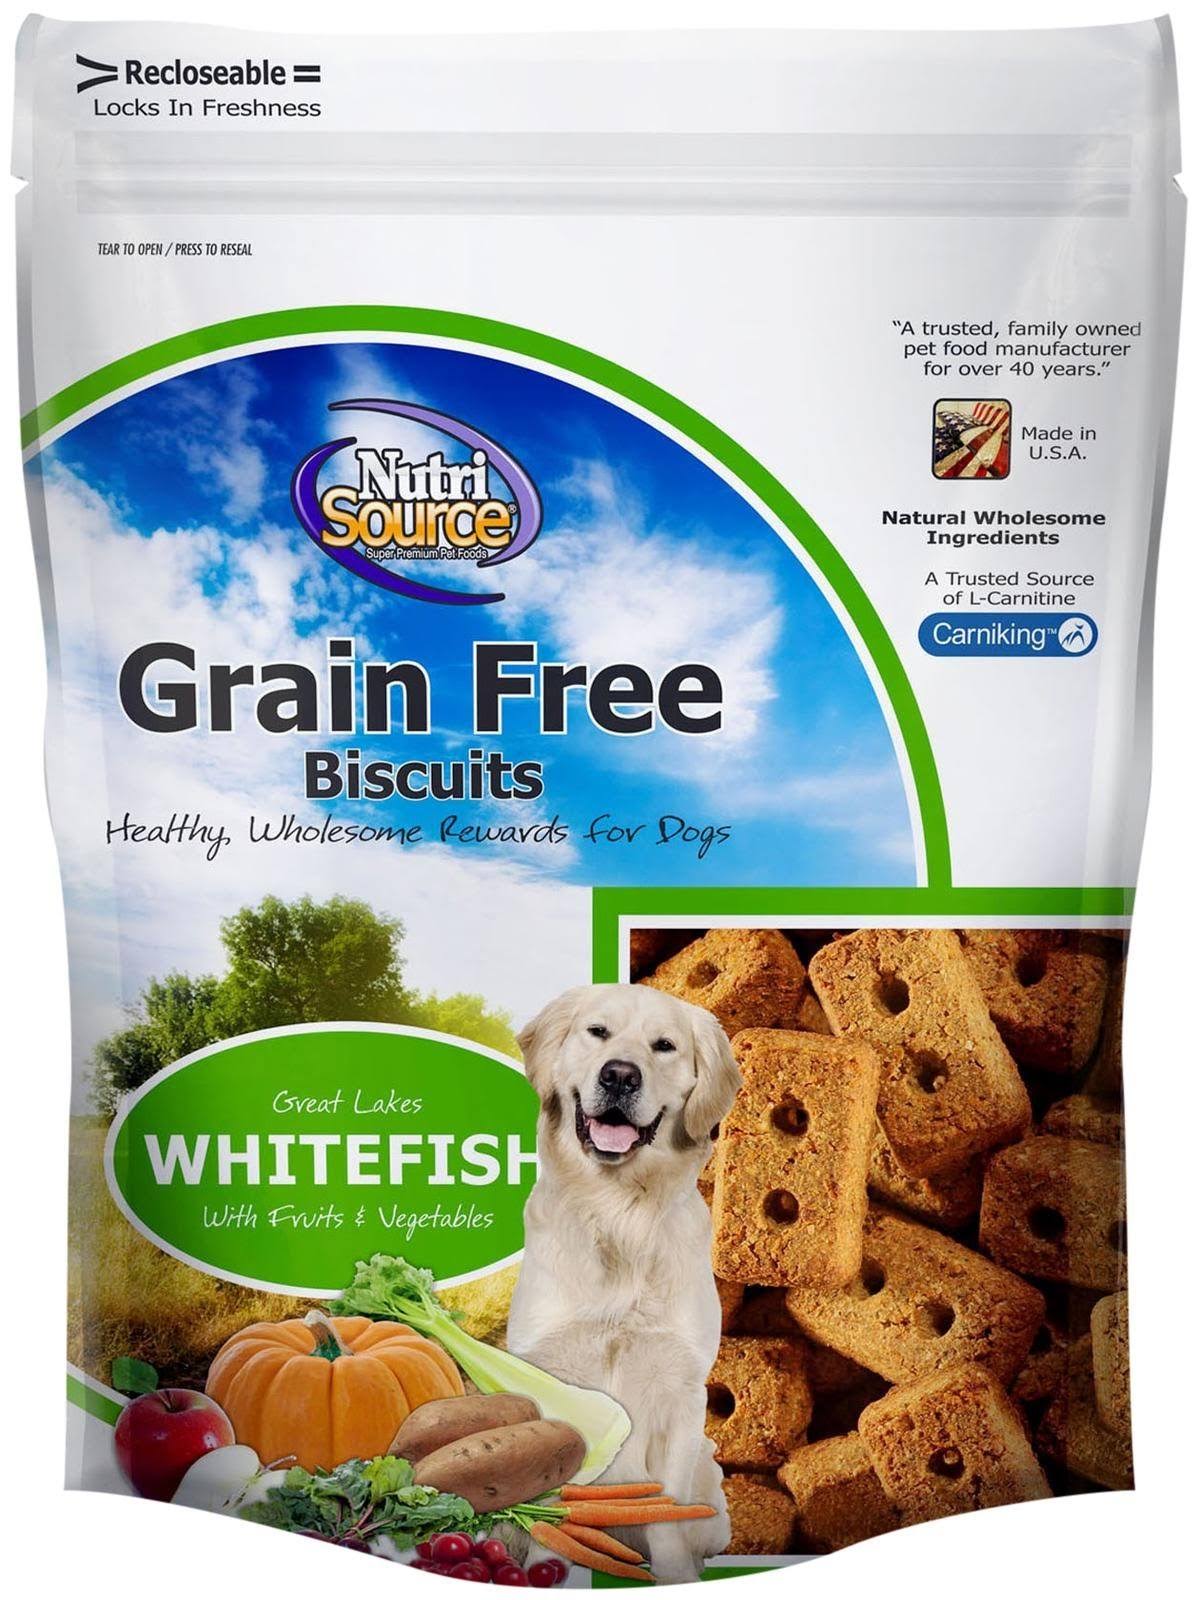 Nutri Source Grain Free Dog Biscuits - Whitefish